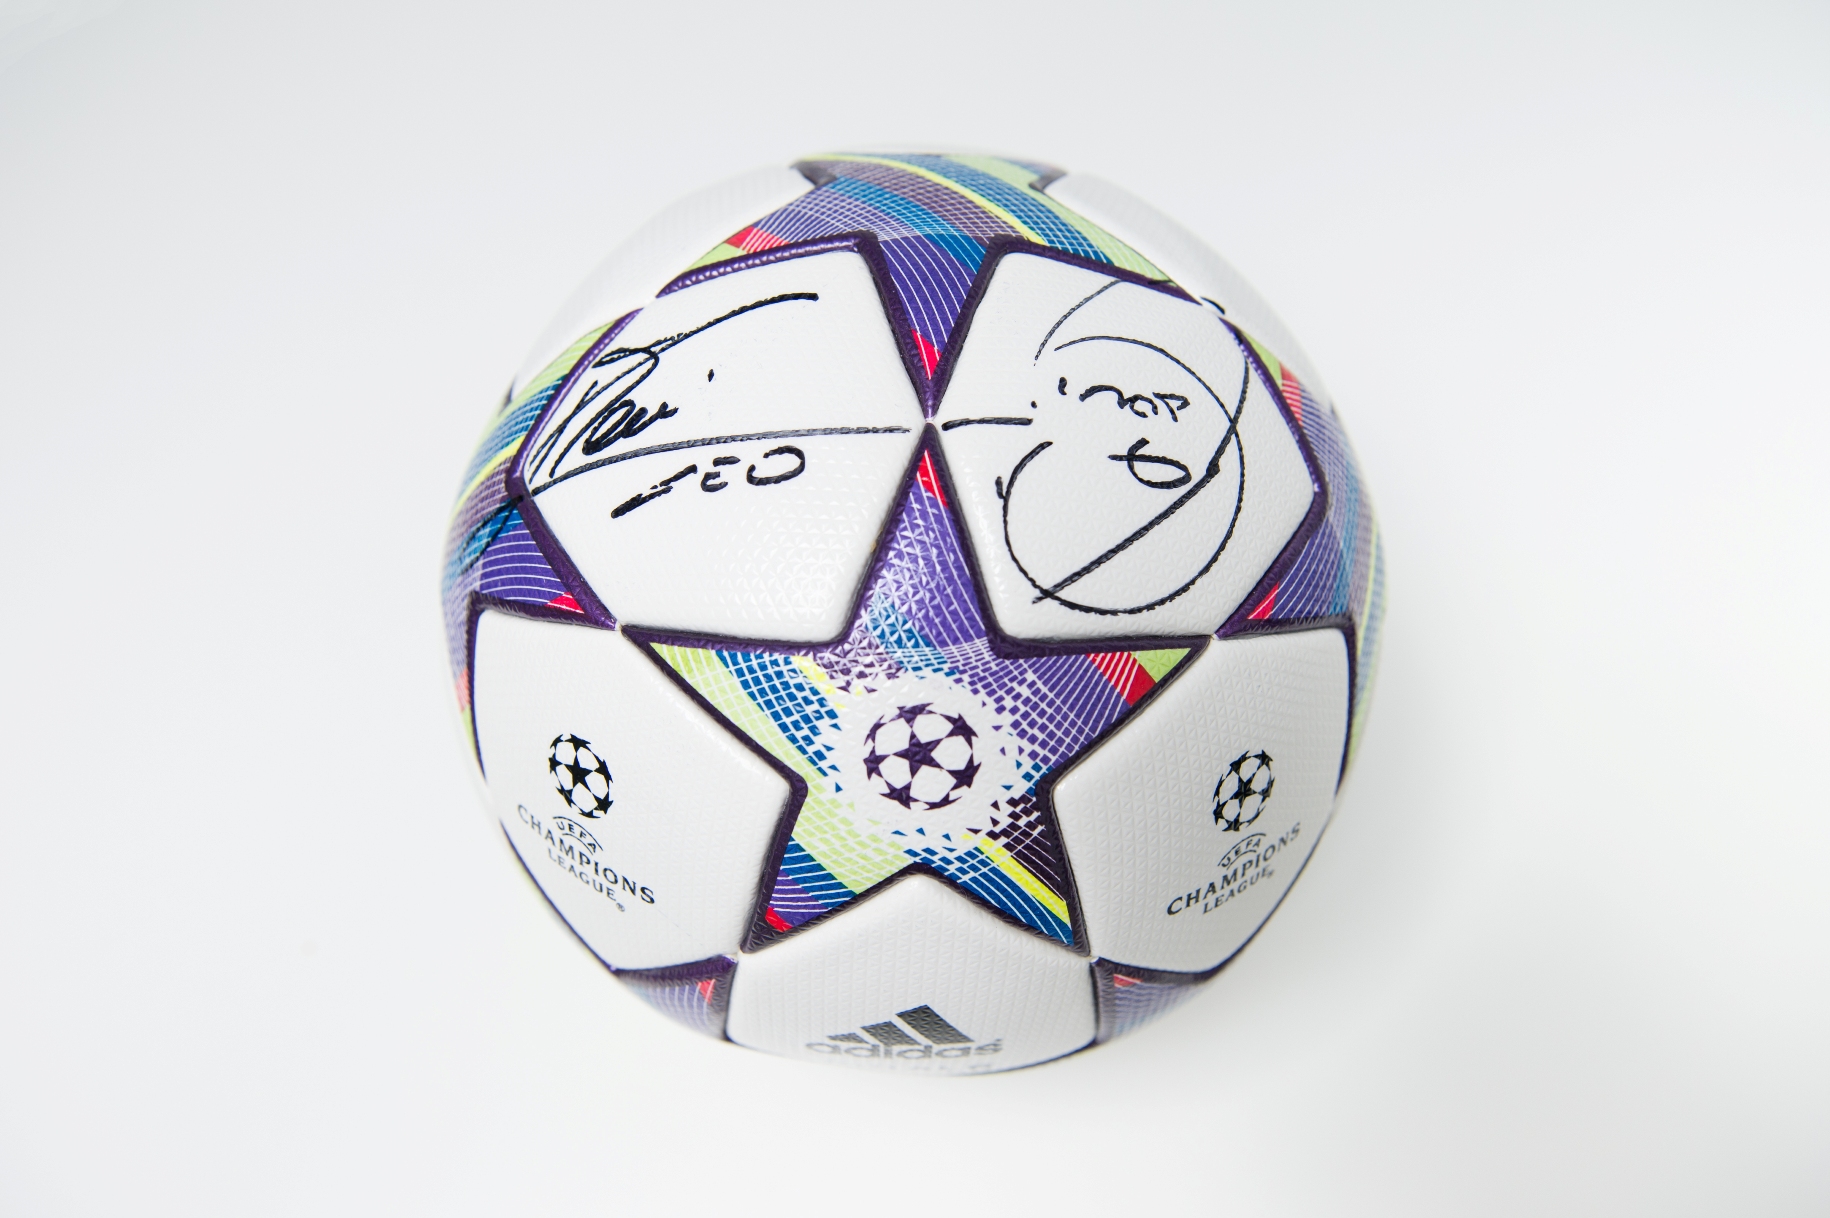 Donated by UEFA. Messi and Xavi signed UEFA Champions League football. This highly collectable  UEFA